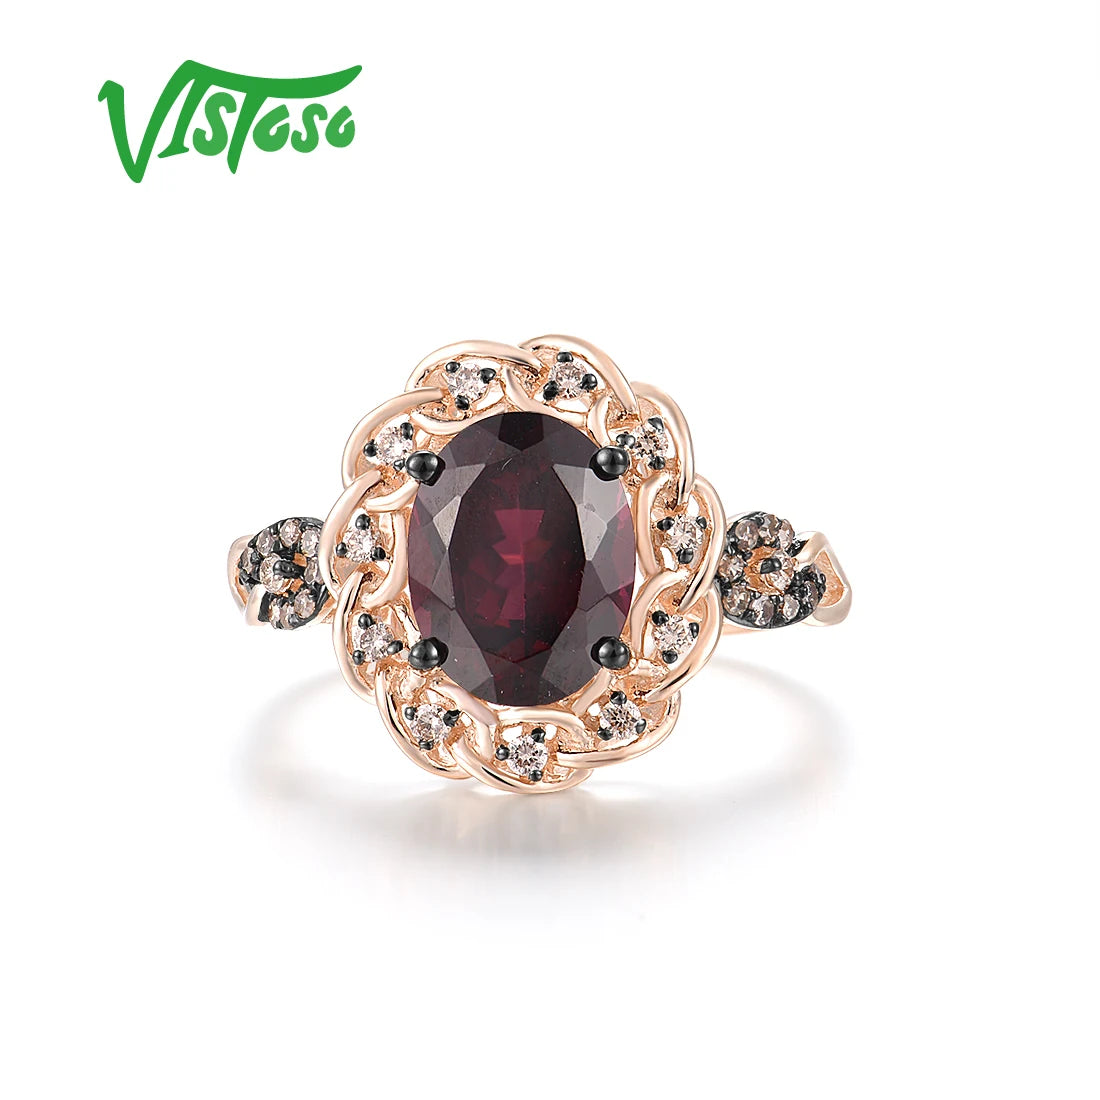 VISTOSO Pure 14K 585 Rose Gold Ring For Women Sparkling Rhodolite Garnet Brown Diamond Solitaire Ring Gorgeous Fine Jewelry